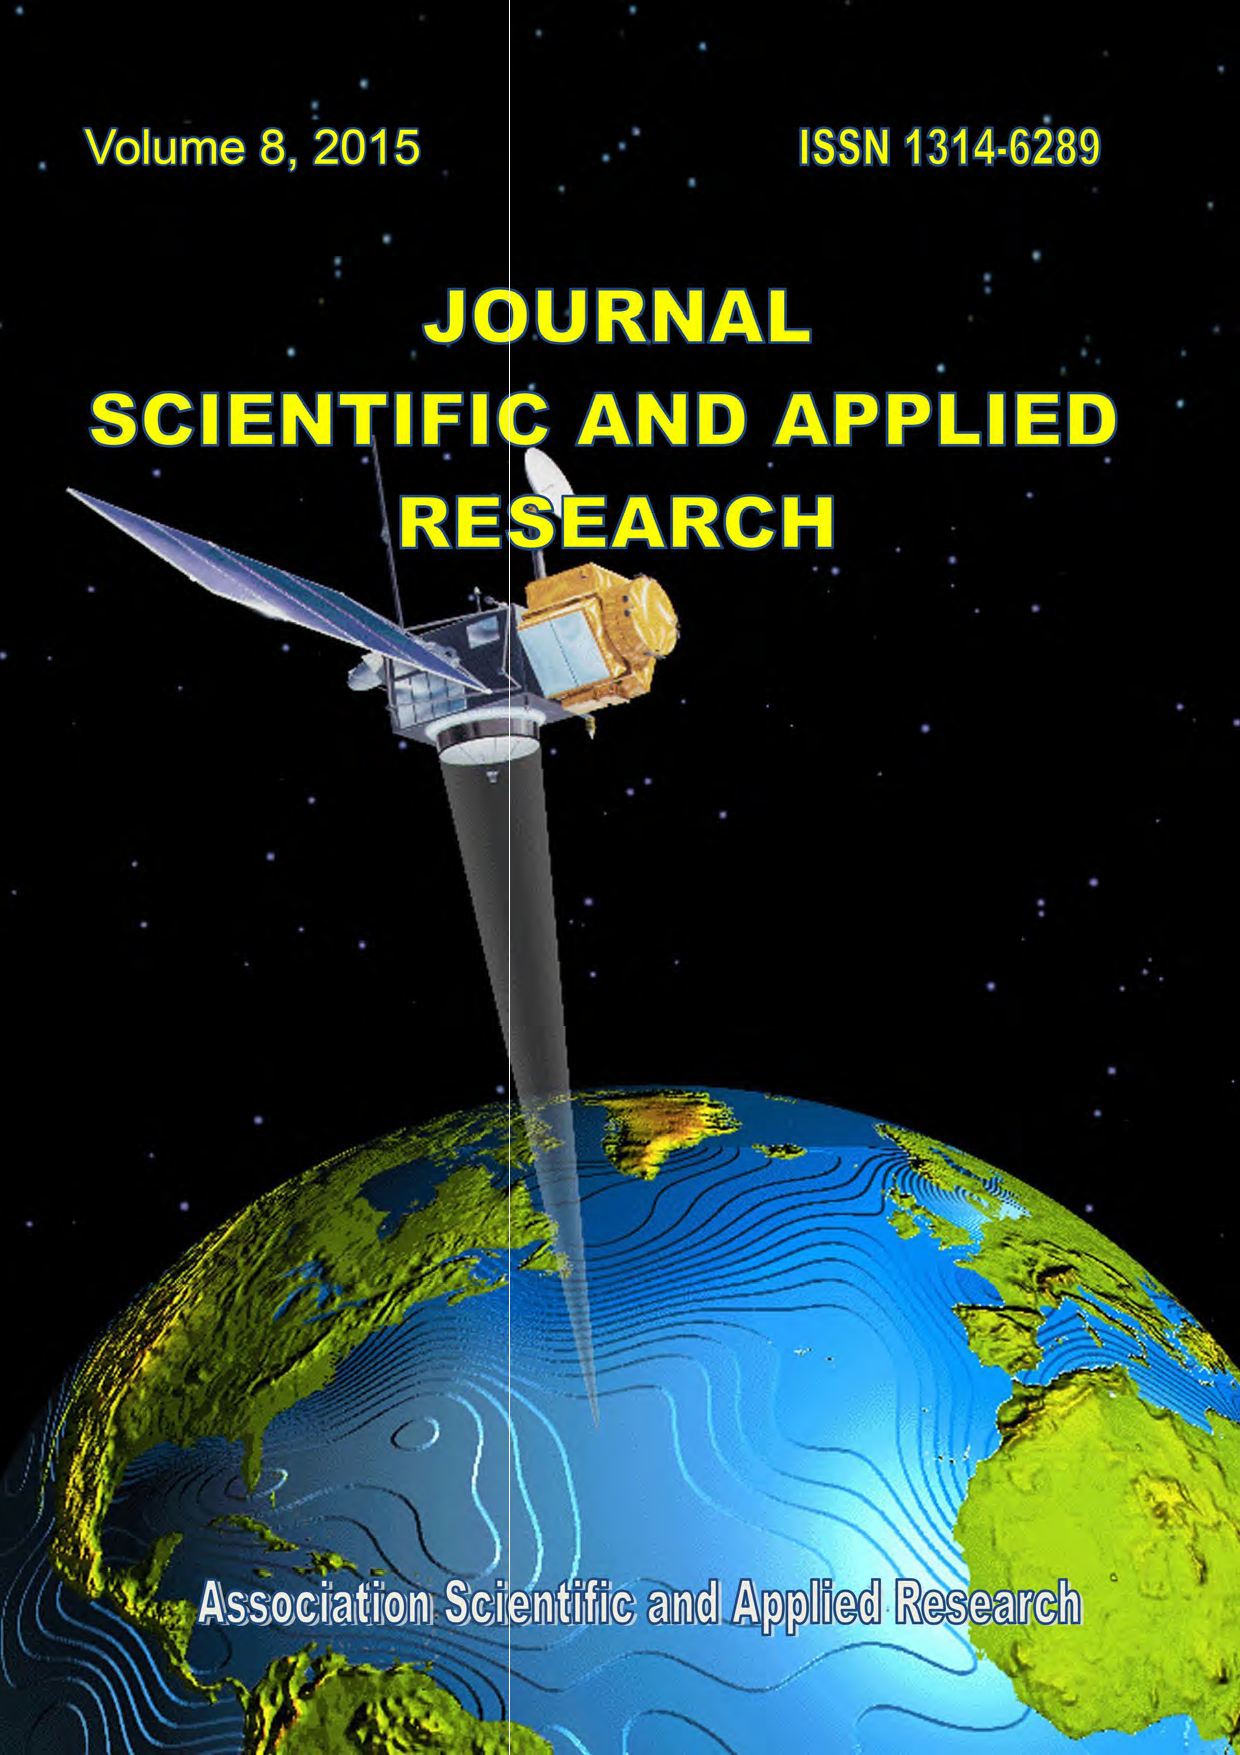 					View Vol. 8 No. 1 (2015): Journal Scientific and Applied Research
				